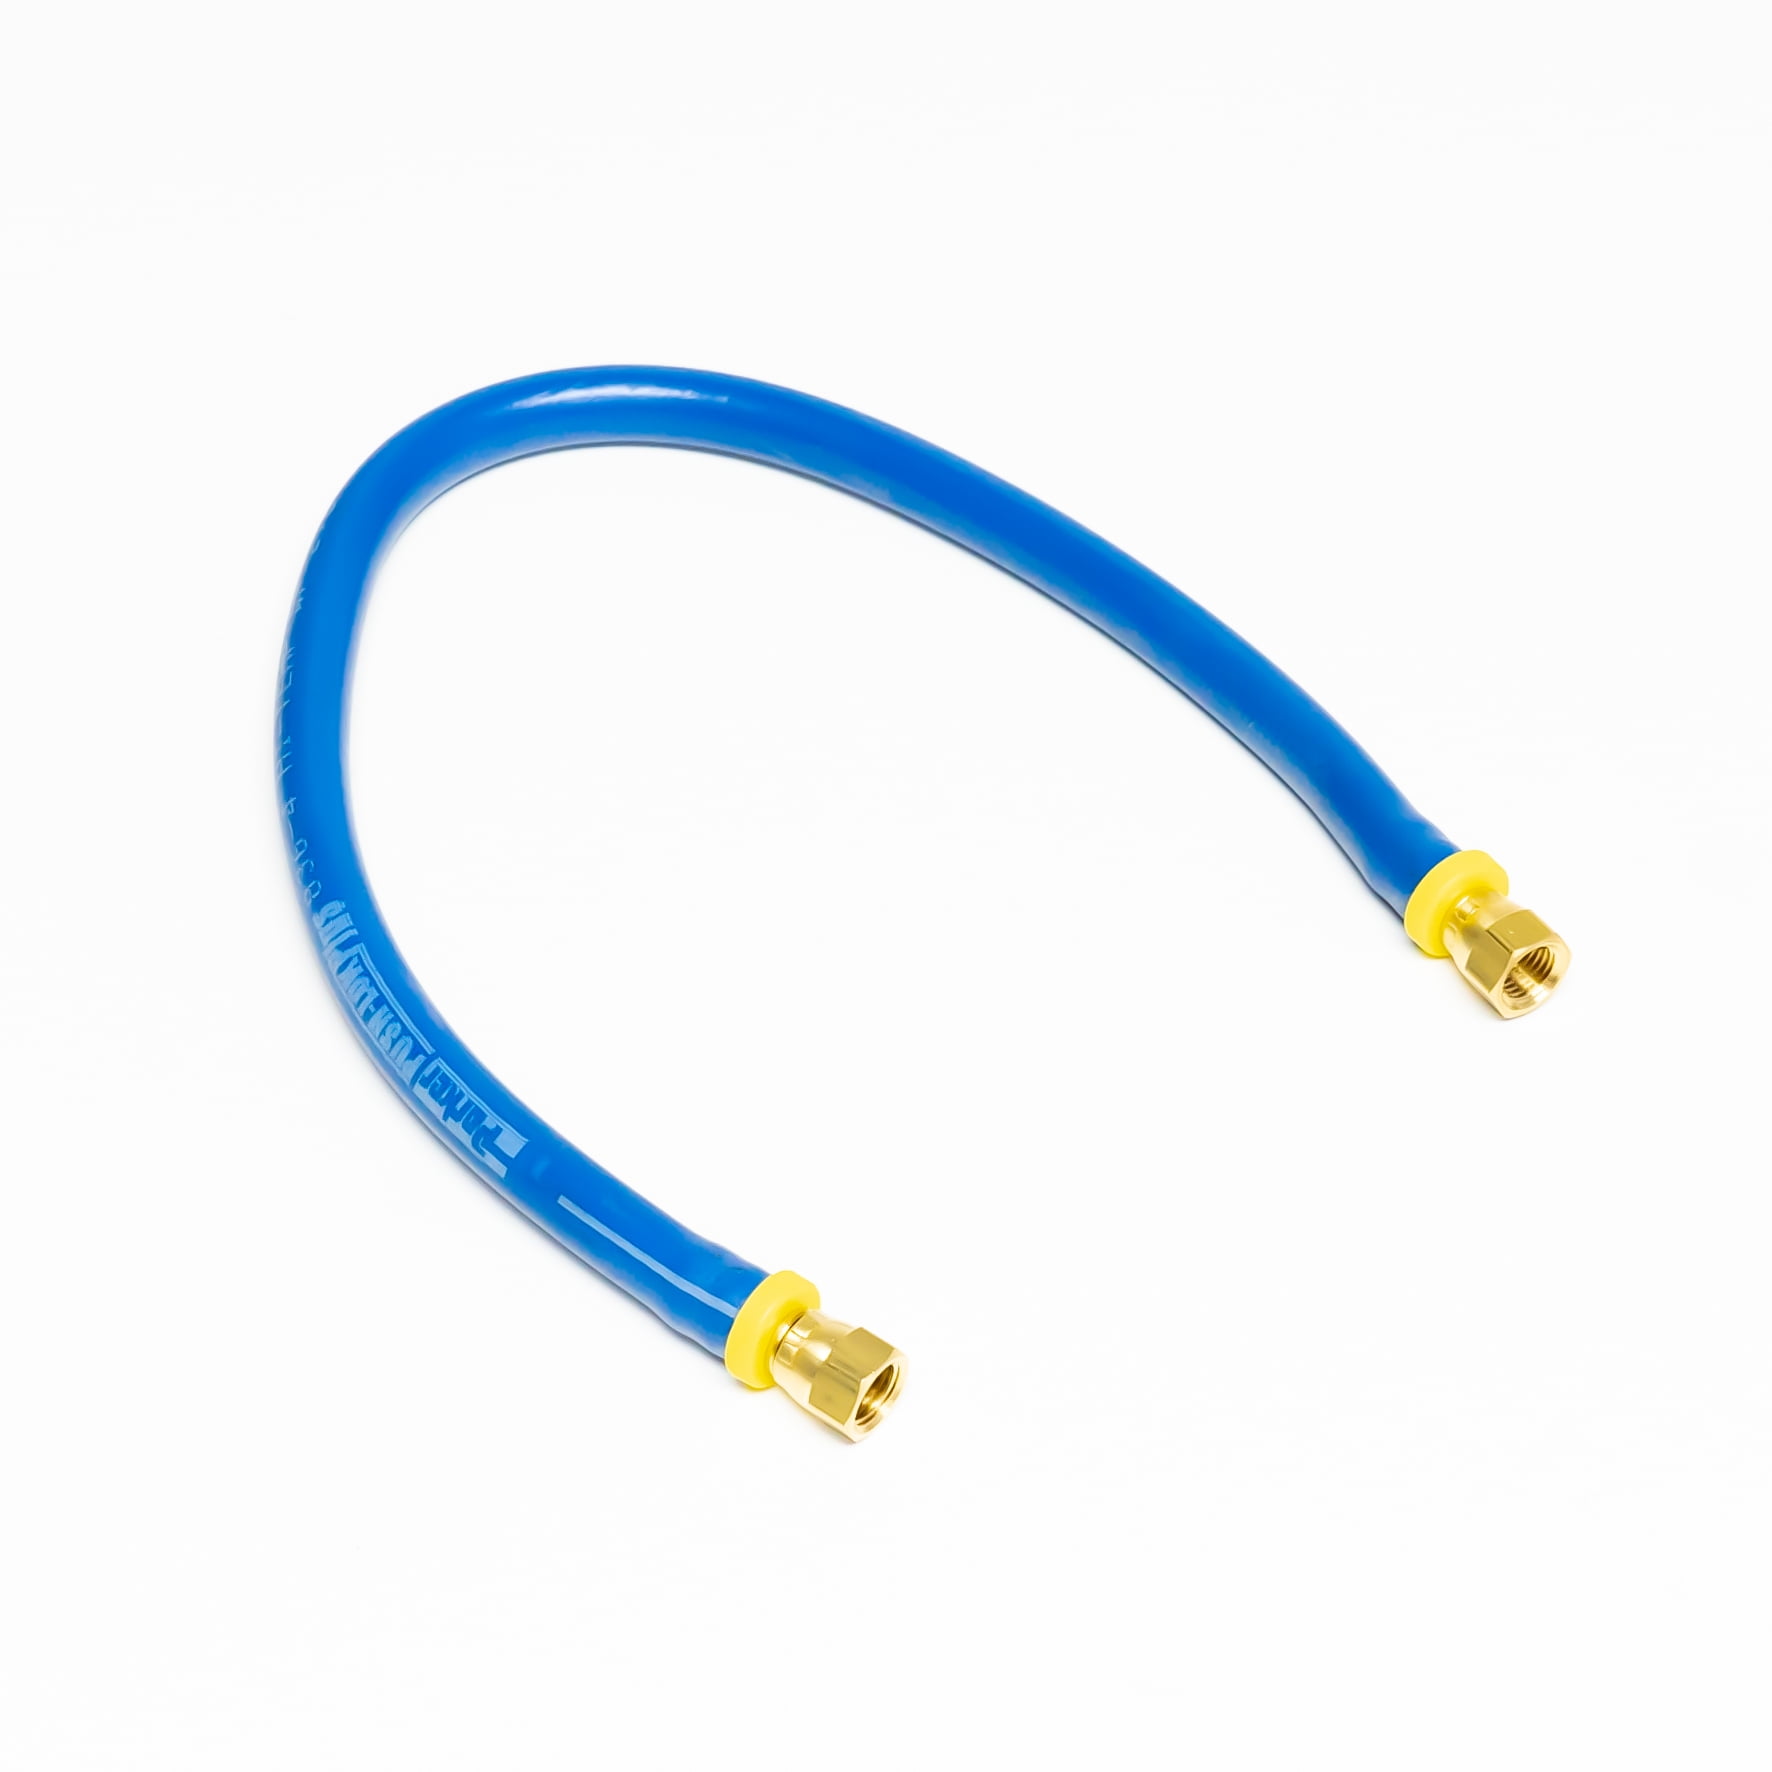 Injector Hose Yellow Jacket 69705 R12 Applicator Hose With Low Loss Fitting 